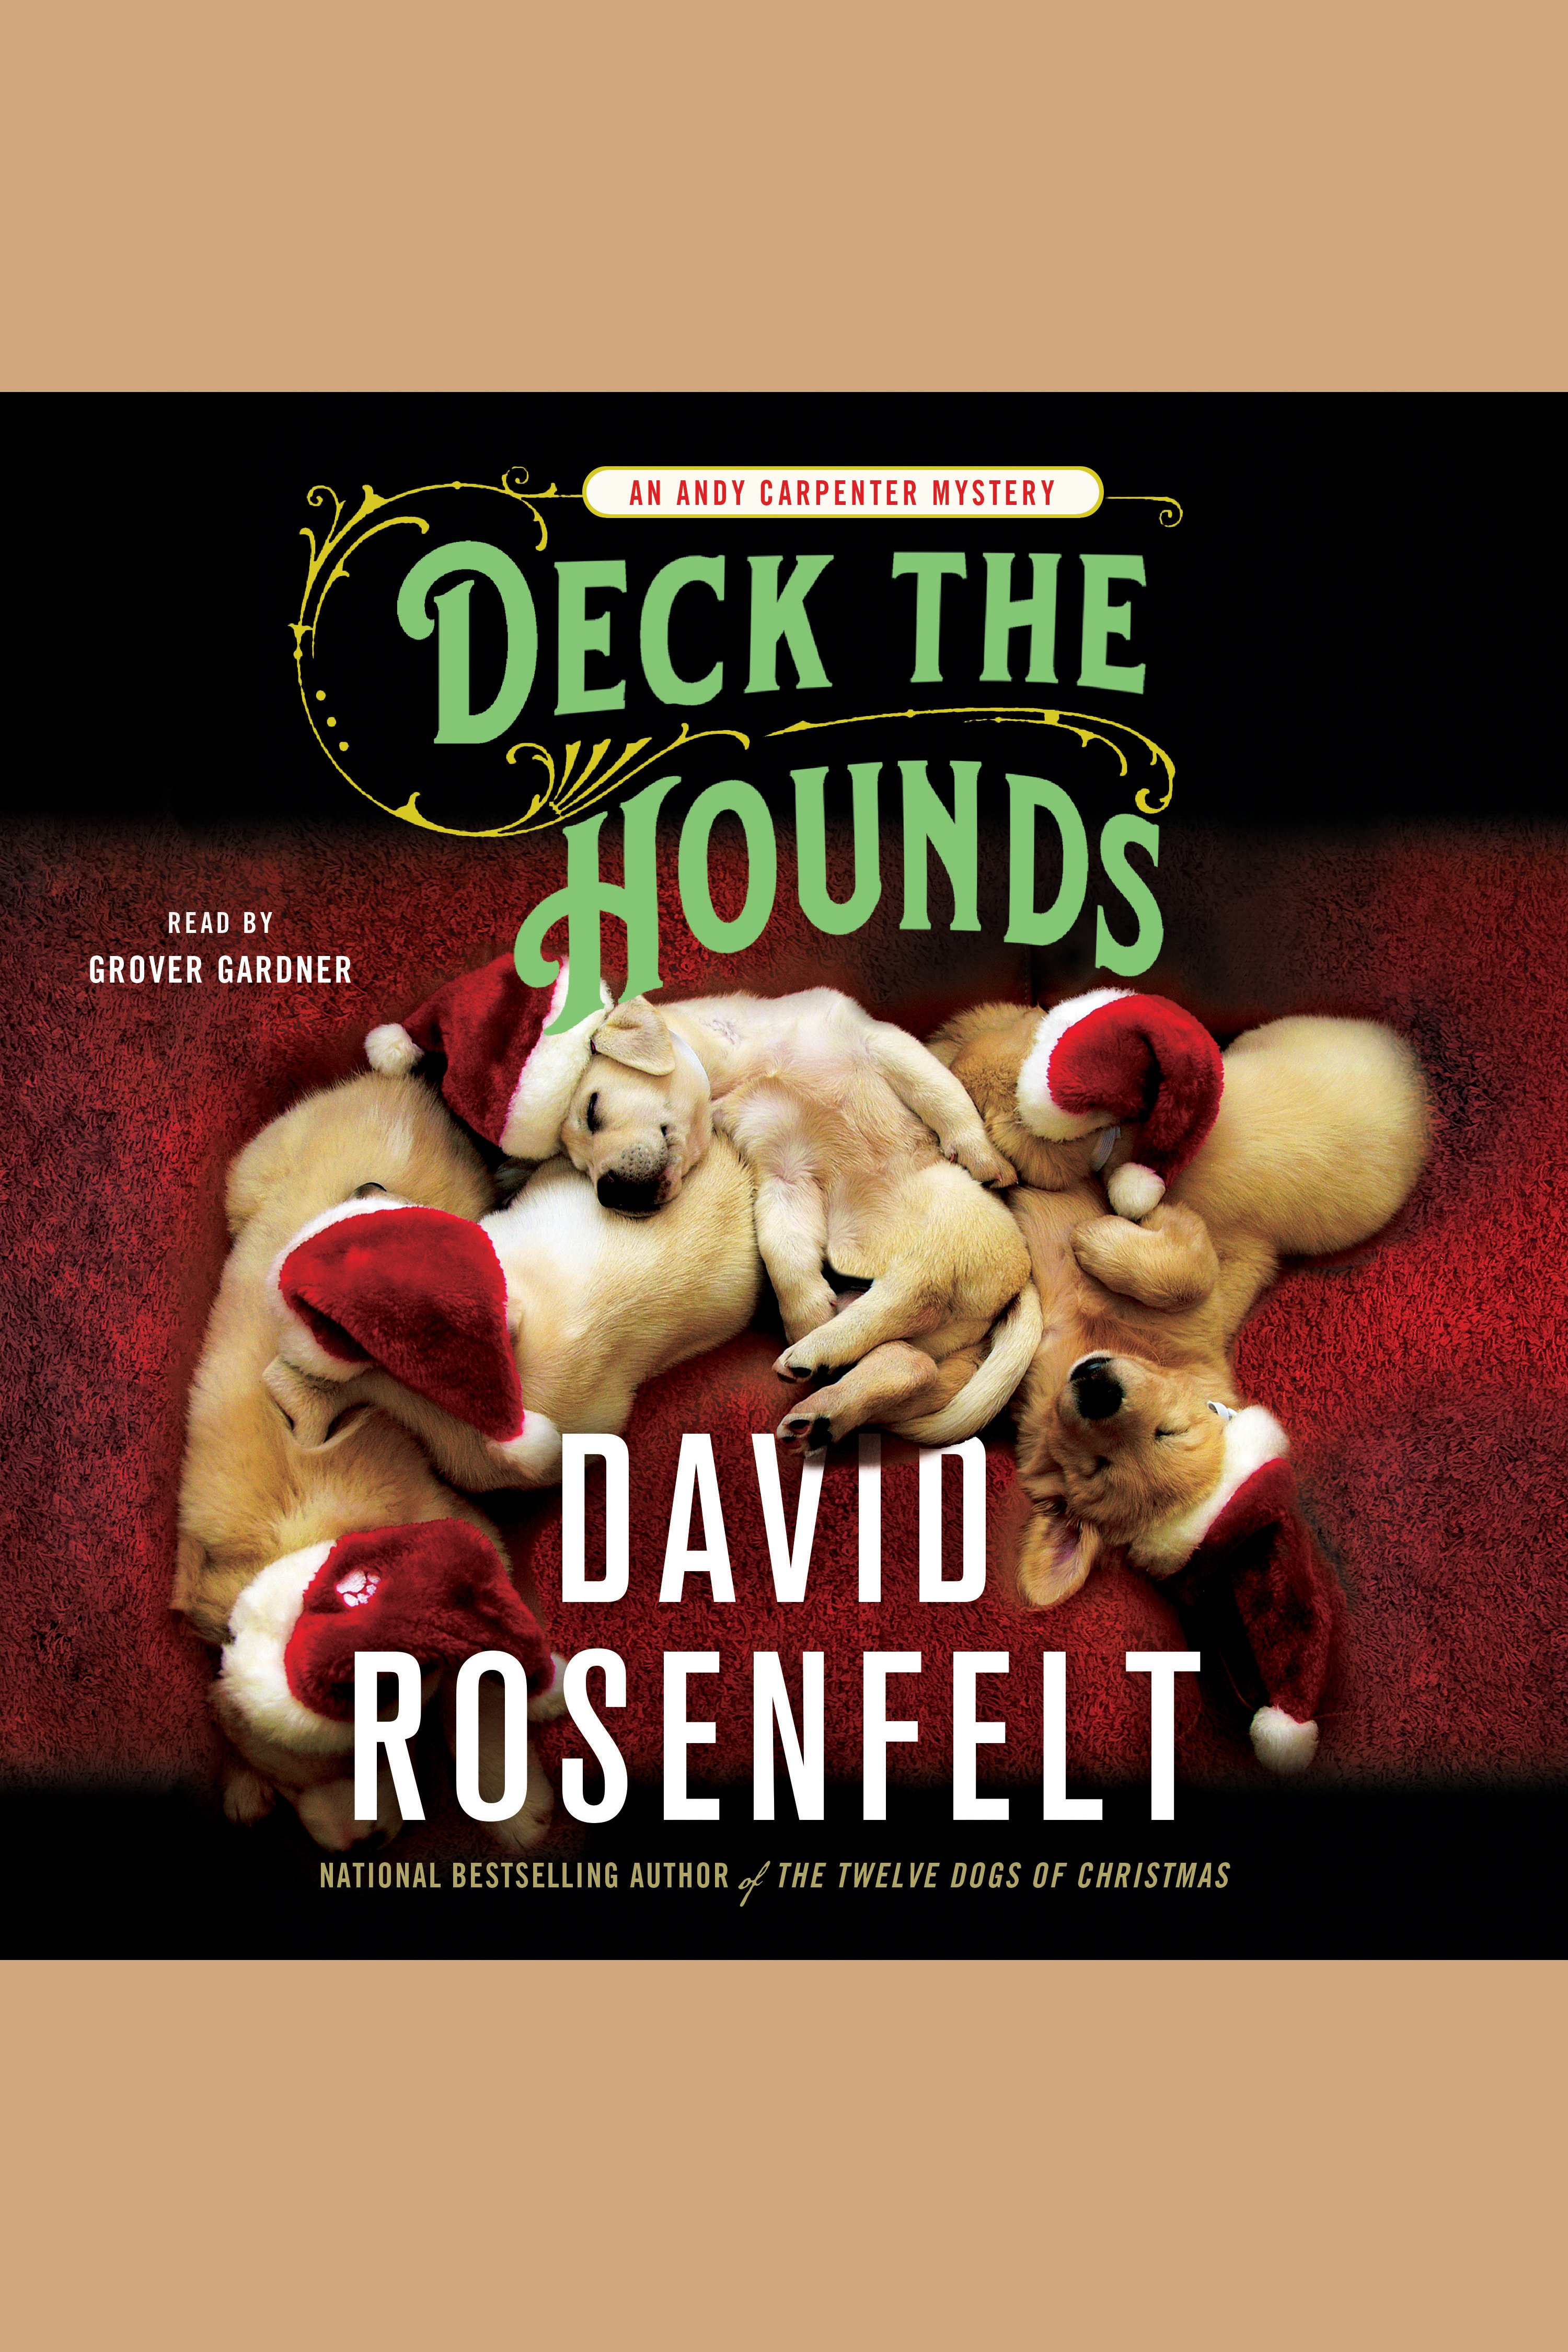 Image de couverture de Deck the Hounds [electronic resource] : An Andy Carpenter Mystery